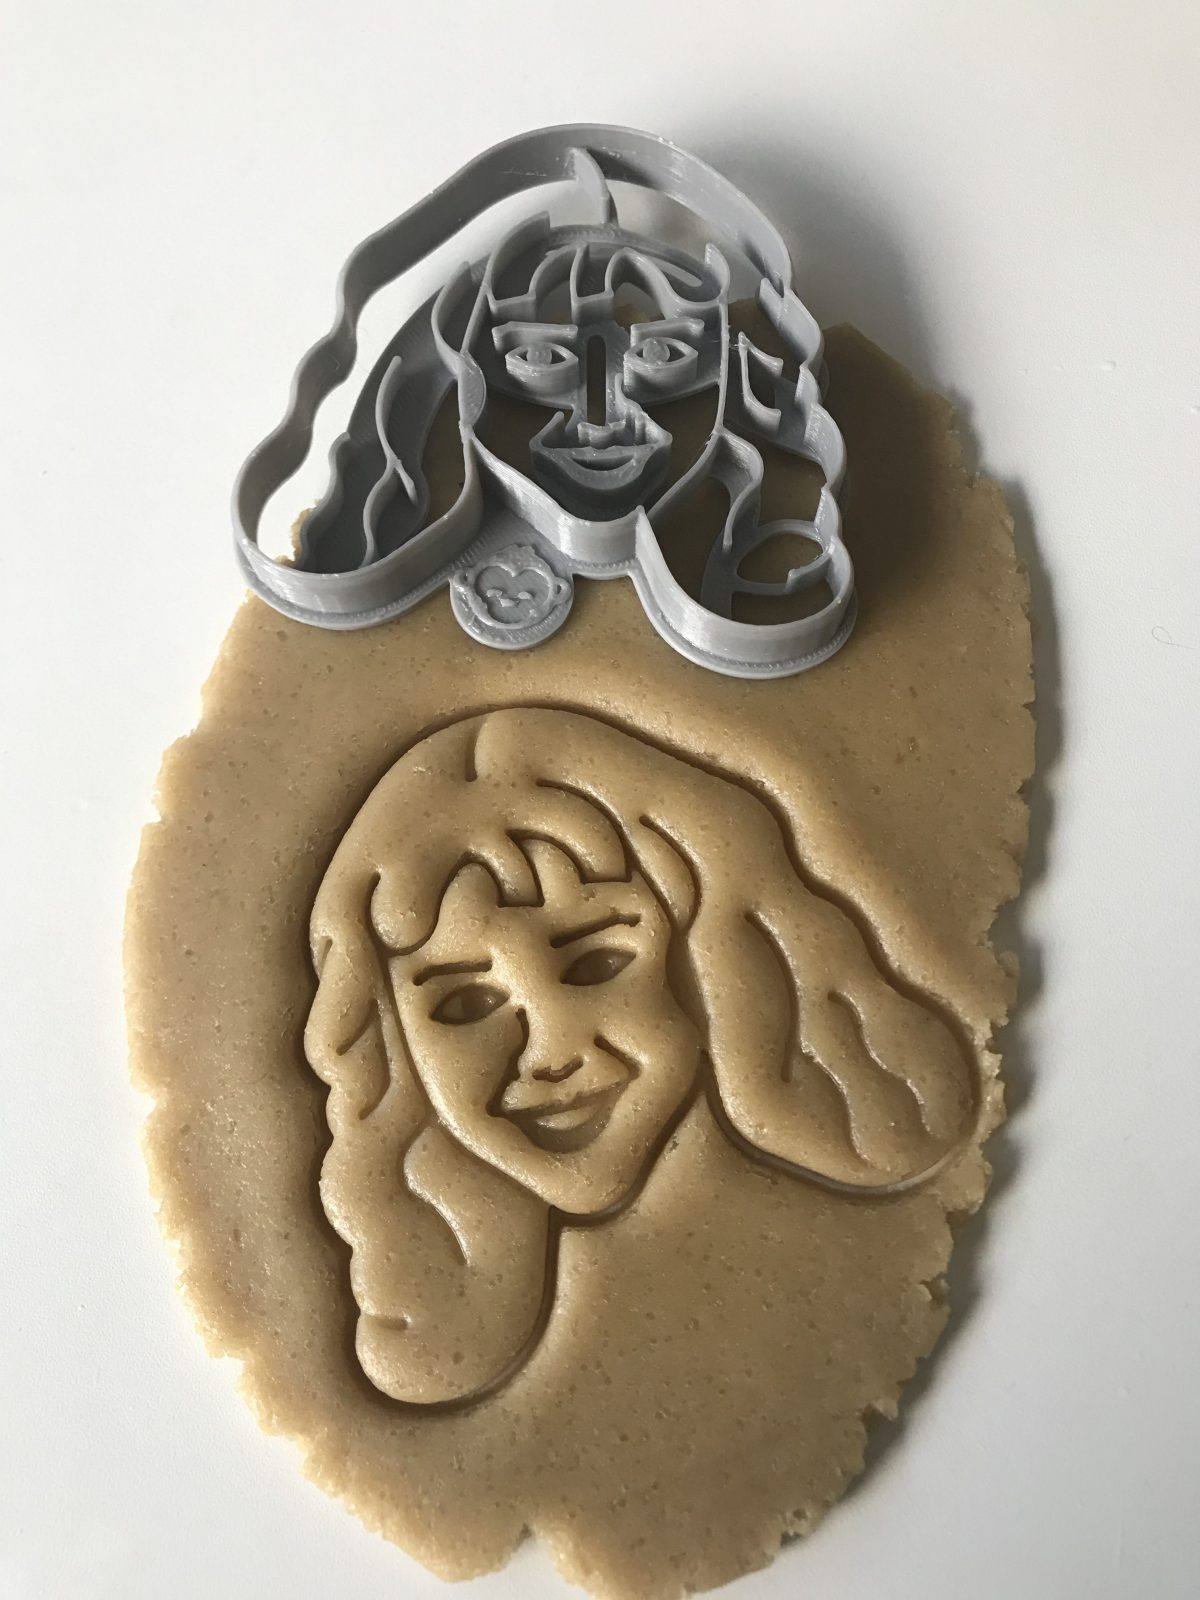 Girl Witch Cookie Cutter